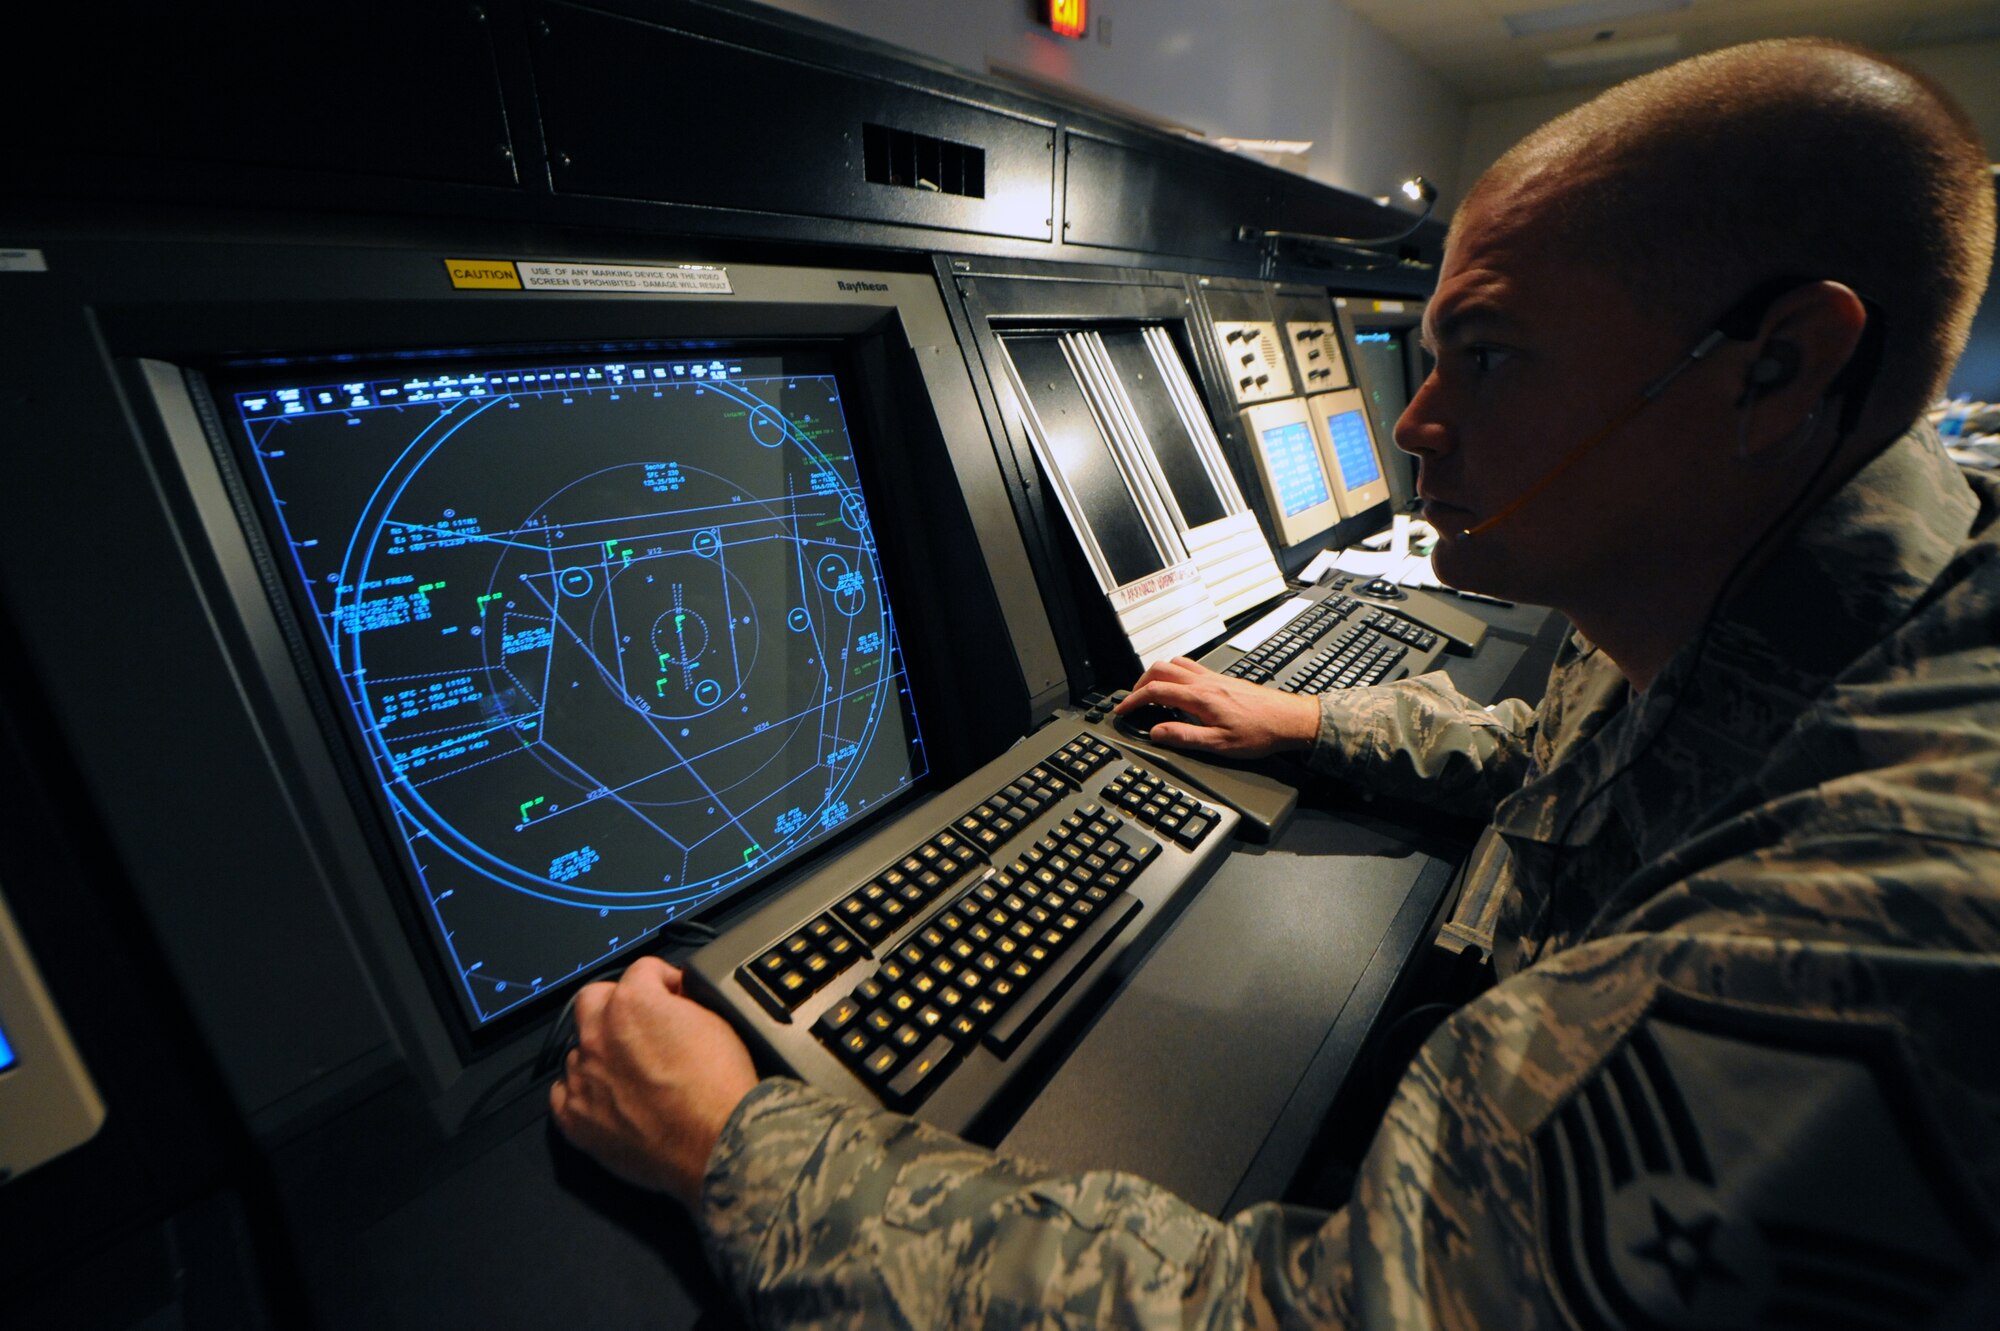 WHITEMAN AIR FORCE BASE, Mo., -- Master Sgt. Lowell Morris, 509th Operations Support Squadron, guides aircraft through Whiteman's airspace.  While deployed, Sergeant Morris coordinated airspace used for combat operations. 
(U.S. Air Force photo/Staff Sgt. Jason Huddleston) (Released)

